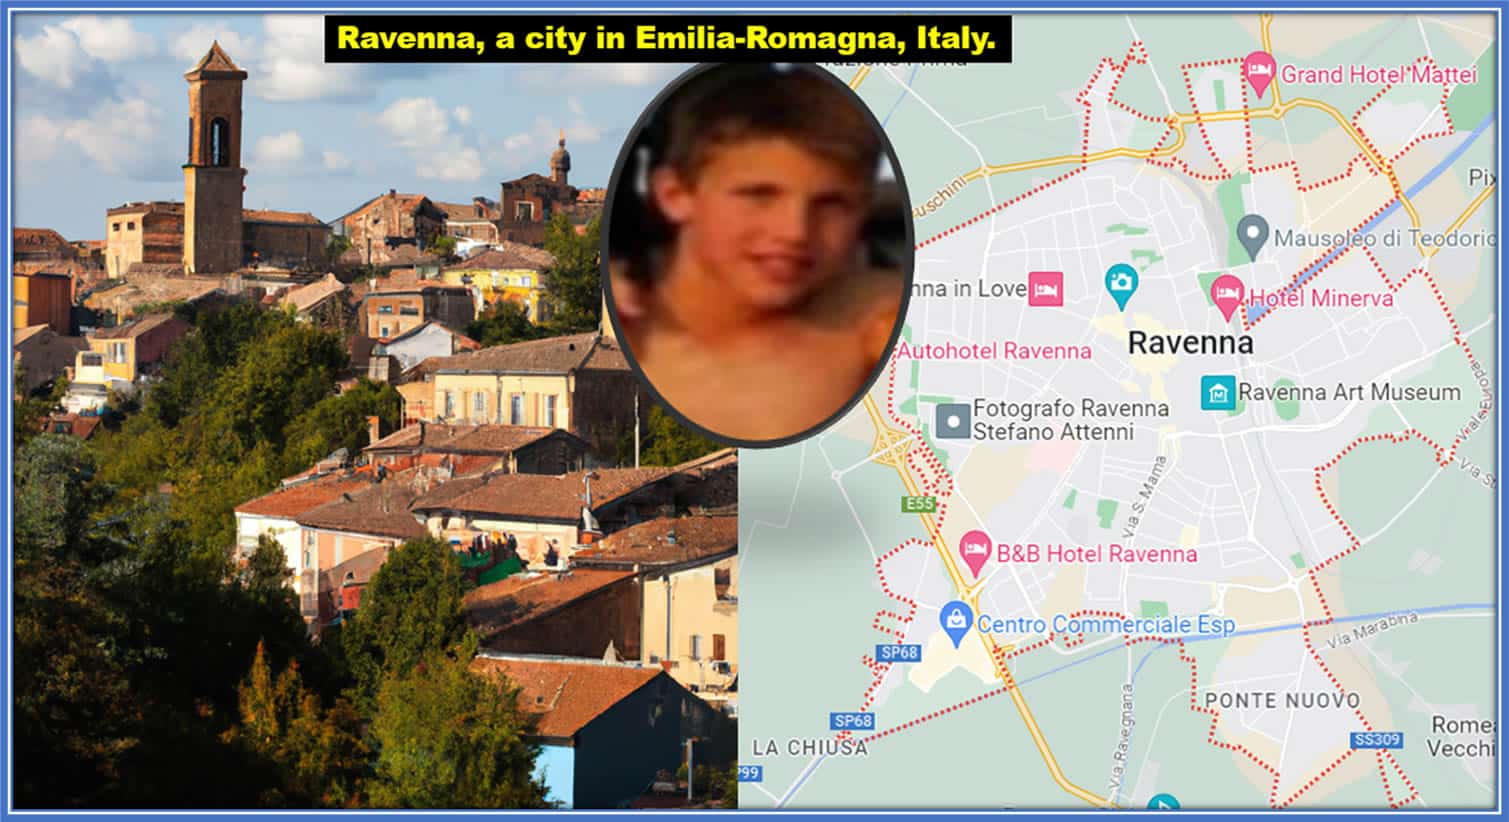 This map gallery explains Cesare Casadei Family Origins. He is Ravenna's Rising Star from the Heart of Emilia-Romagna,